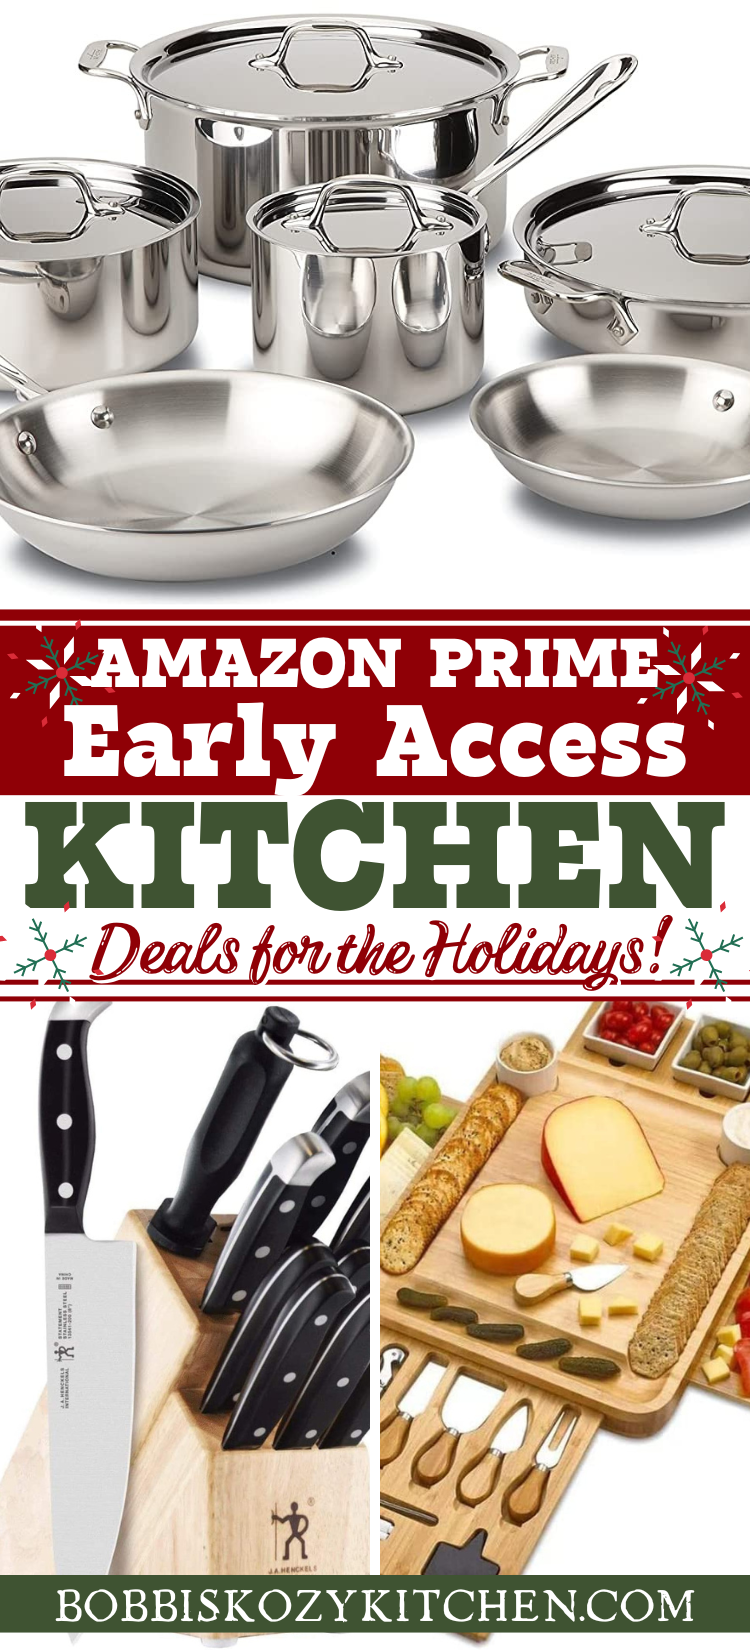 Amazon Early Access Kitchen Deals